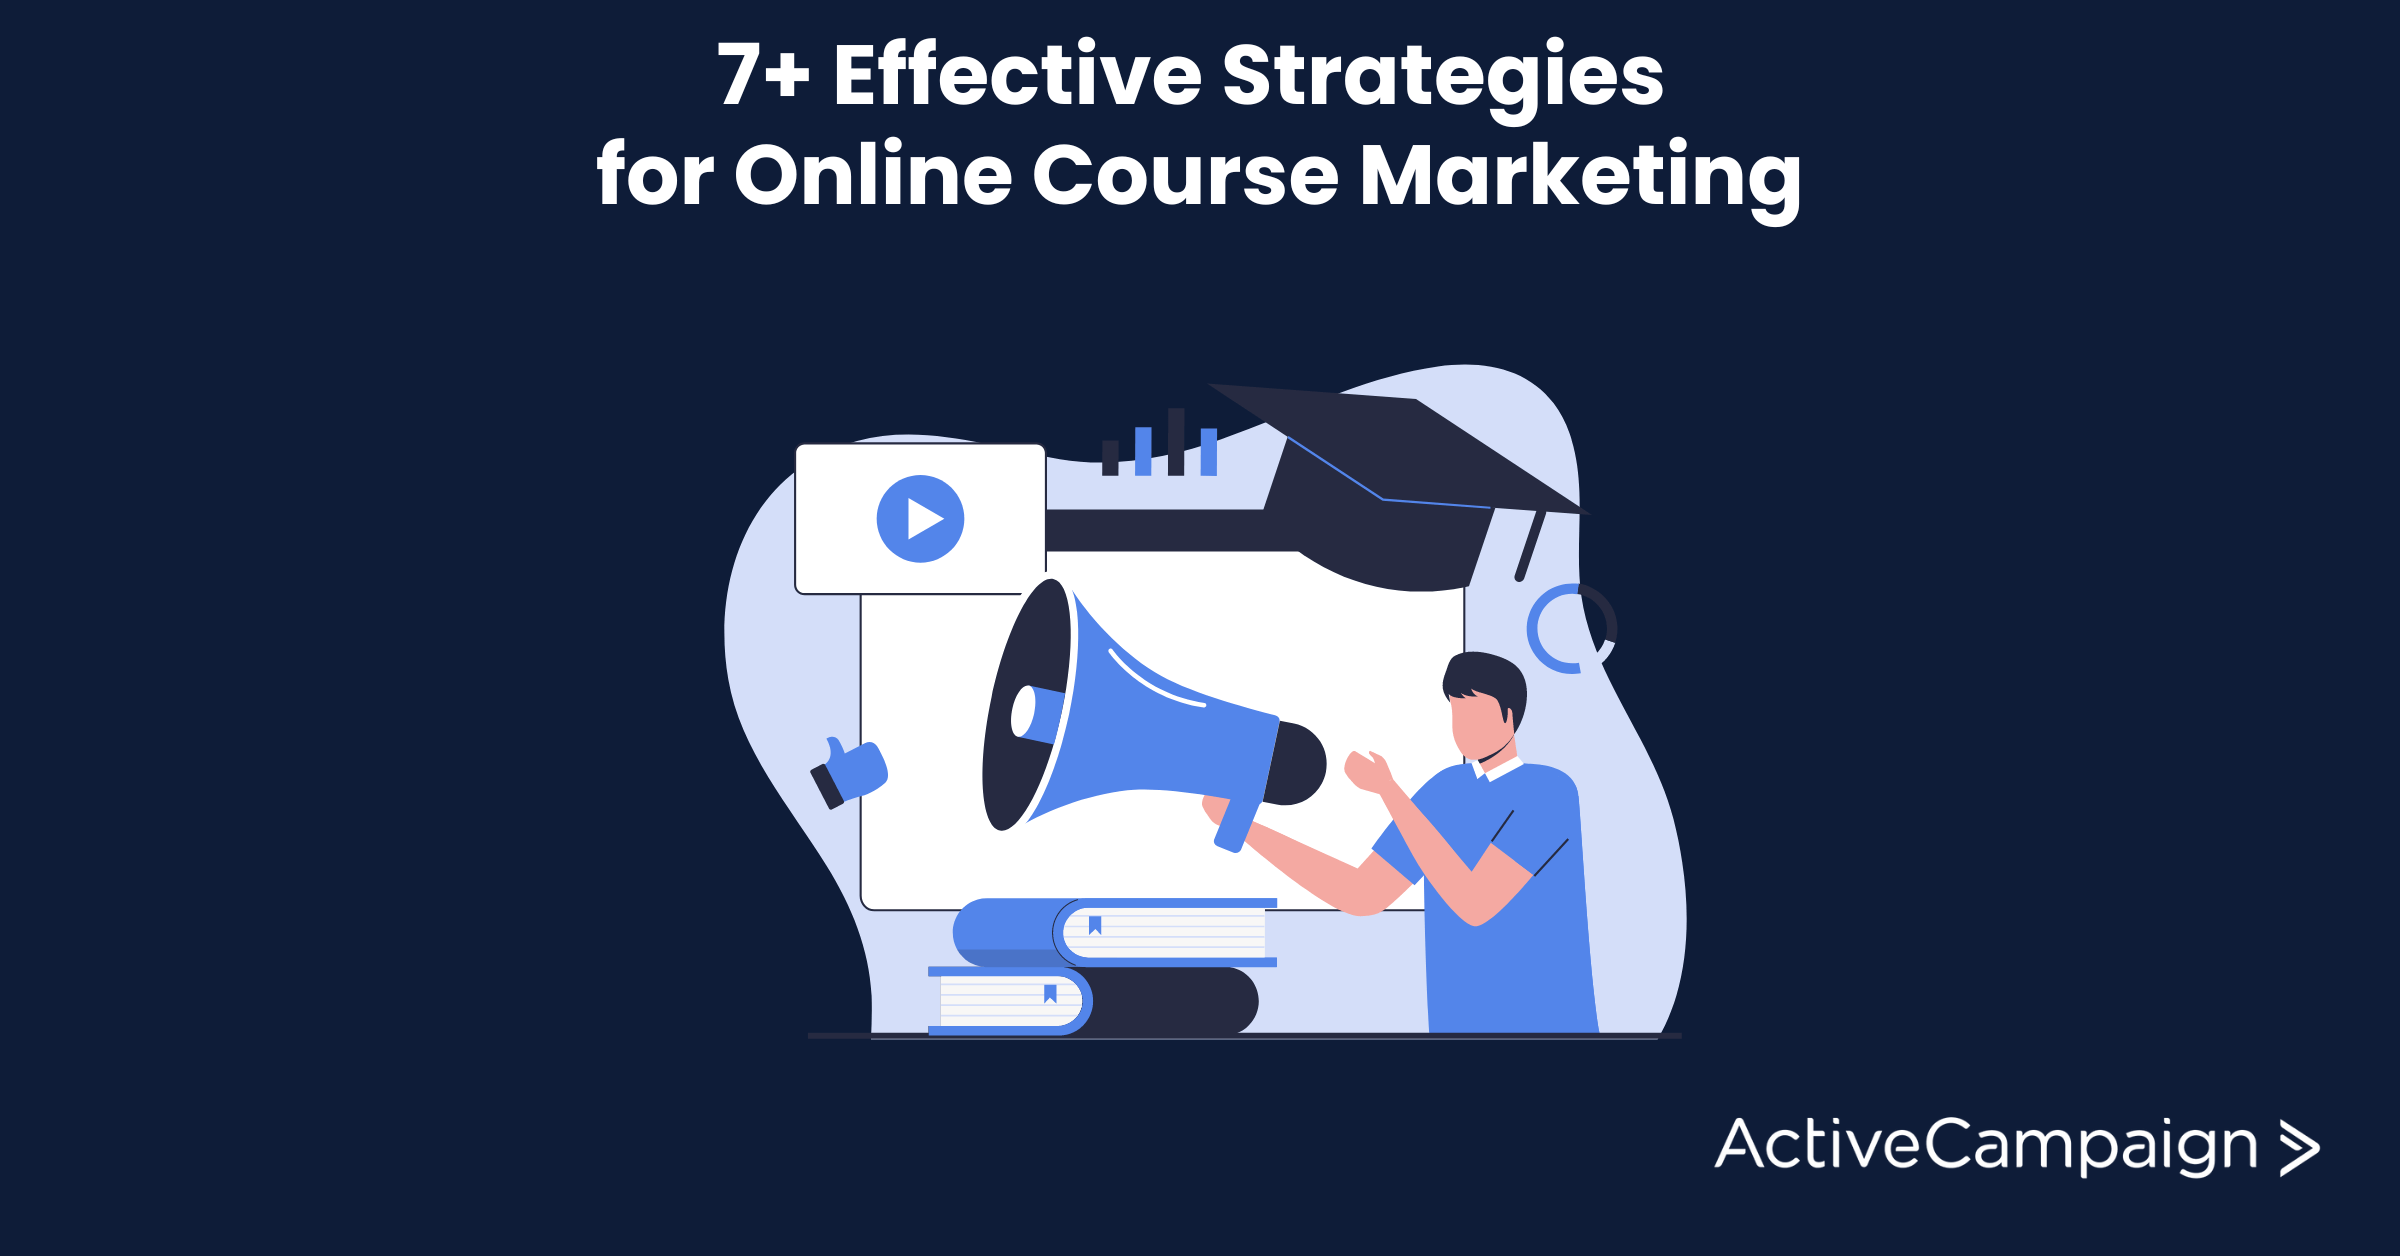 7+ Effective Strategies for Online Course Marketing